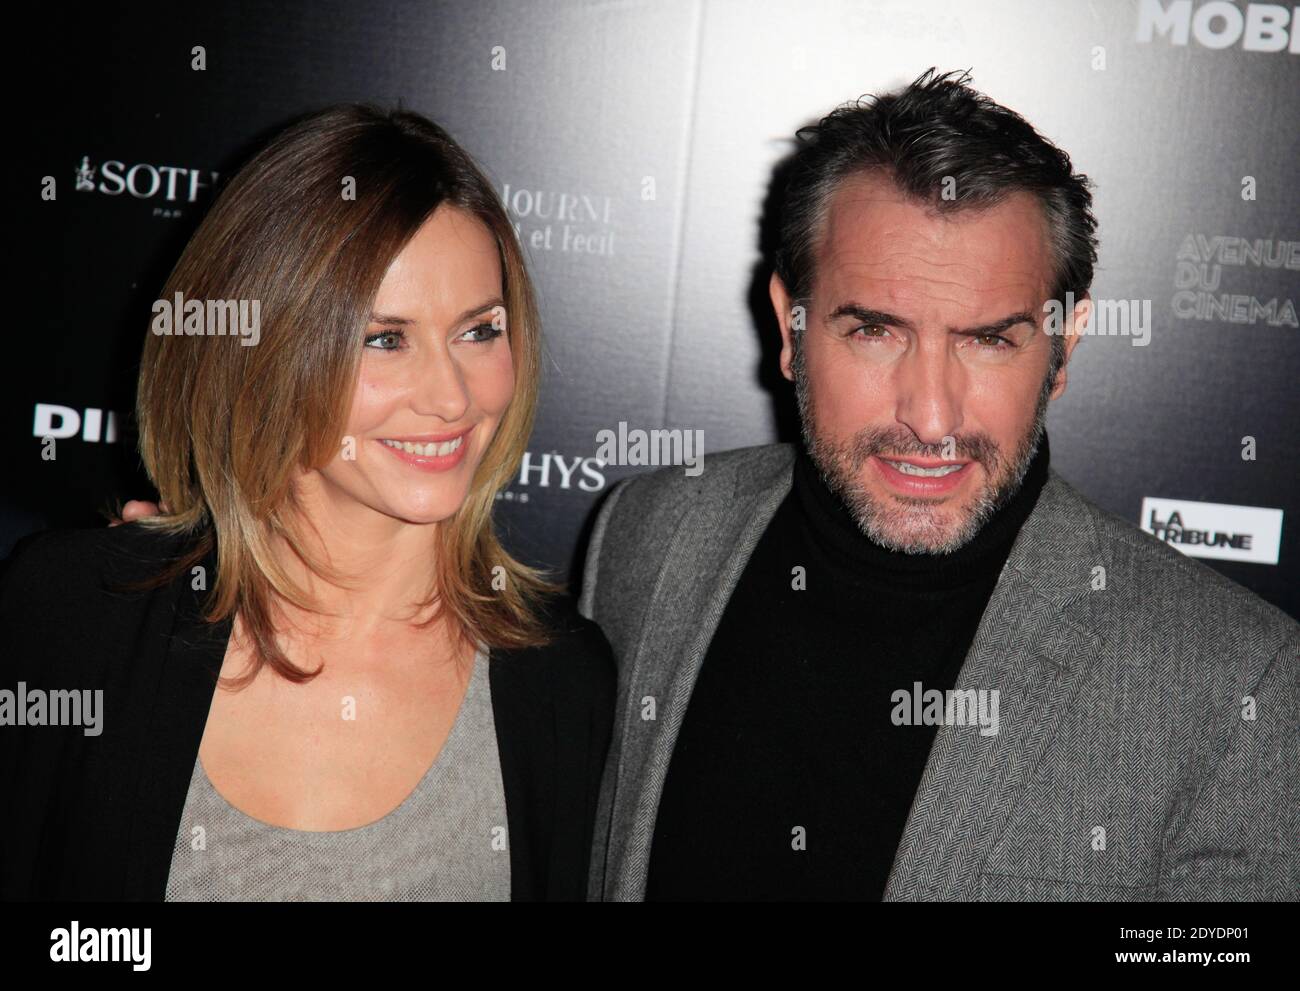 Cecile de France and Jean Dujardin attending the premiere of 'Mobius' held  at the cinema UGC Normandie in Paris, France on February 12, 2013. Photo by  Jerome Domine/ABACAPRESS.COM Stock Photo - Alamy